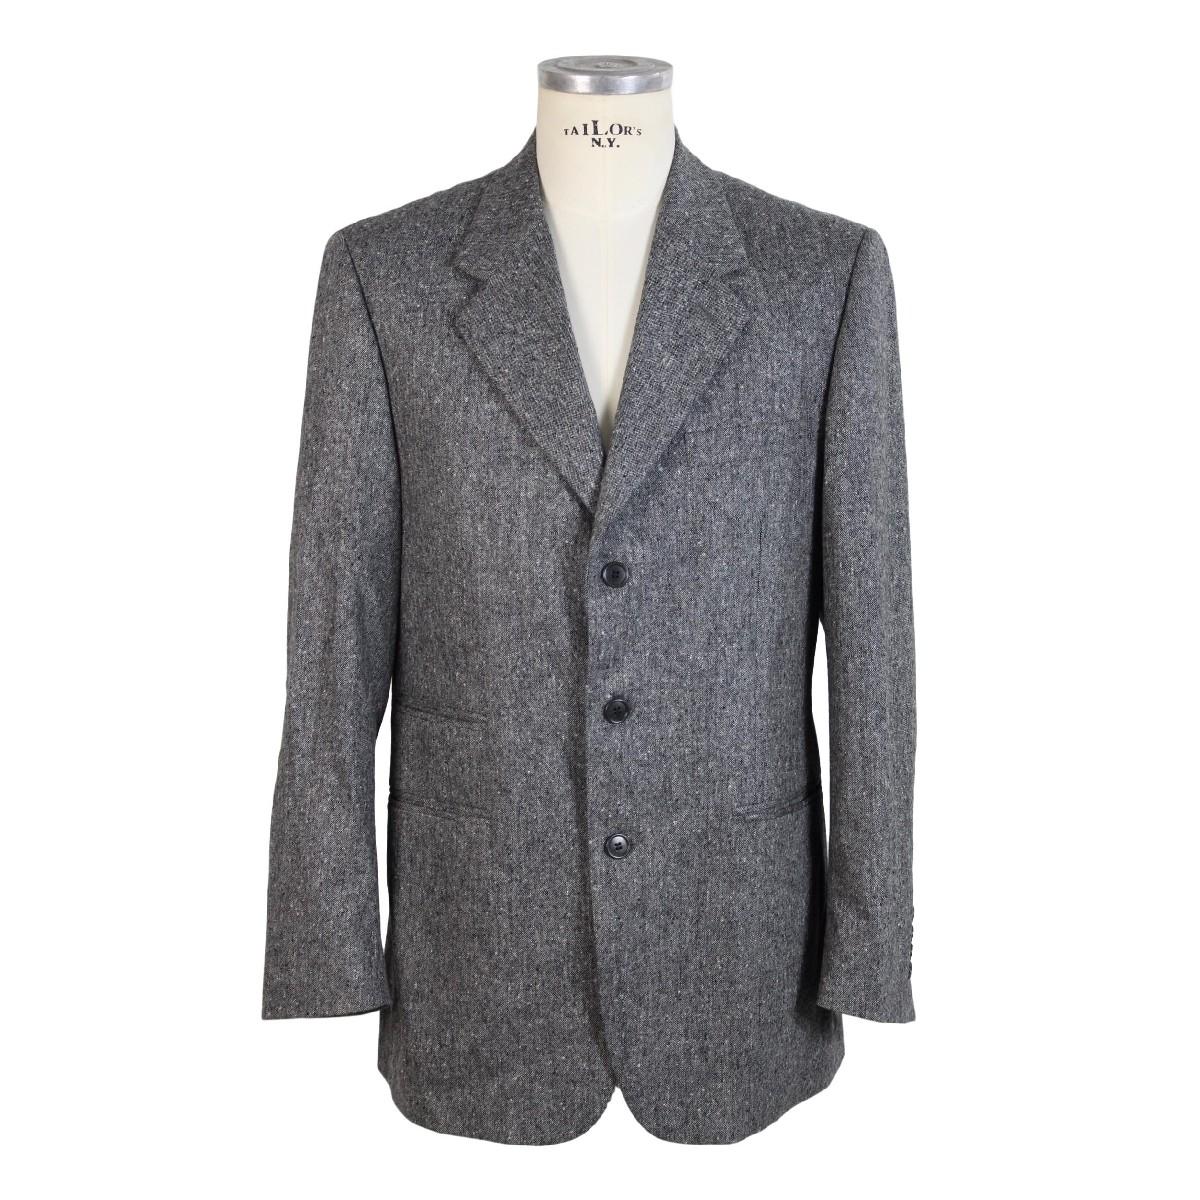 Roberto Capucci vintage men's suit, black and white tweed wool jacket and trousers, excellent condition.

Size 50 It 40 US 40 UK

Shoulder: 50 cm.
Armpit to the armpit: 56 cm.
Sleeve: 65 cm.
Length: 88 cm.
Trousers in the waist: 43 cm
Length of the